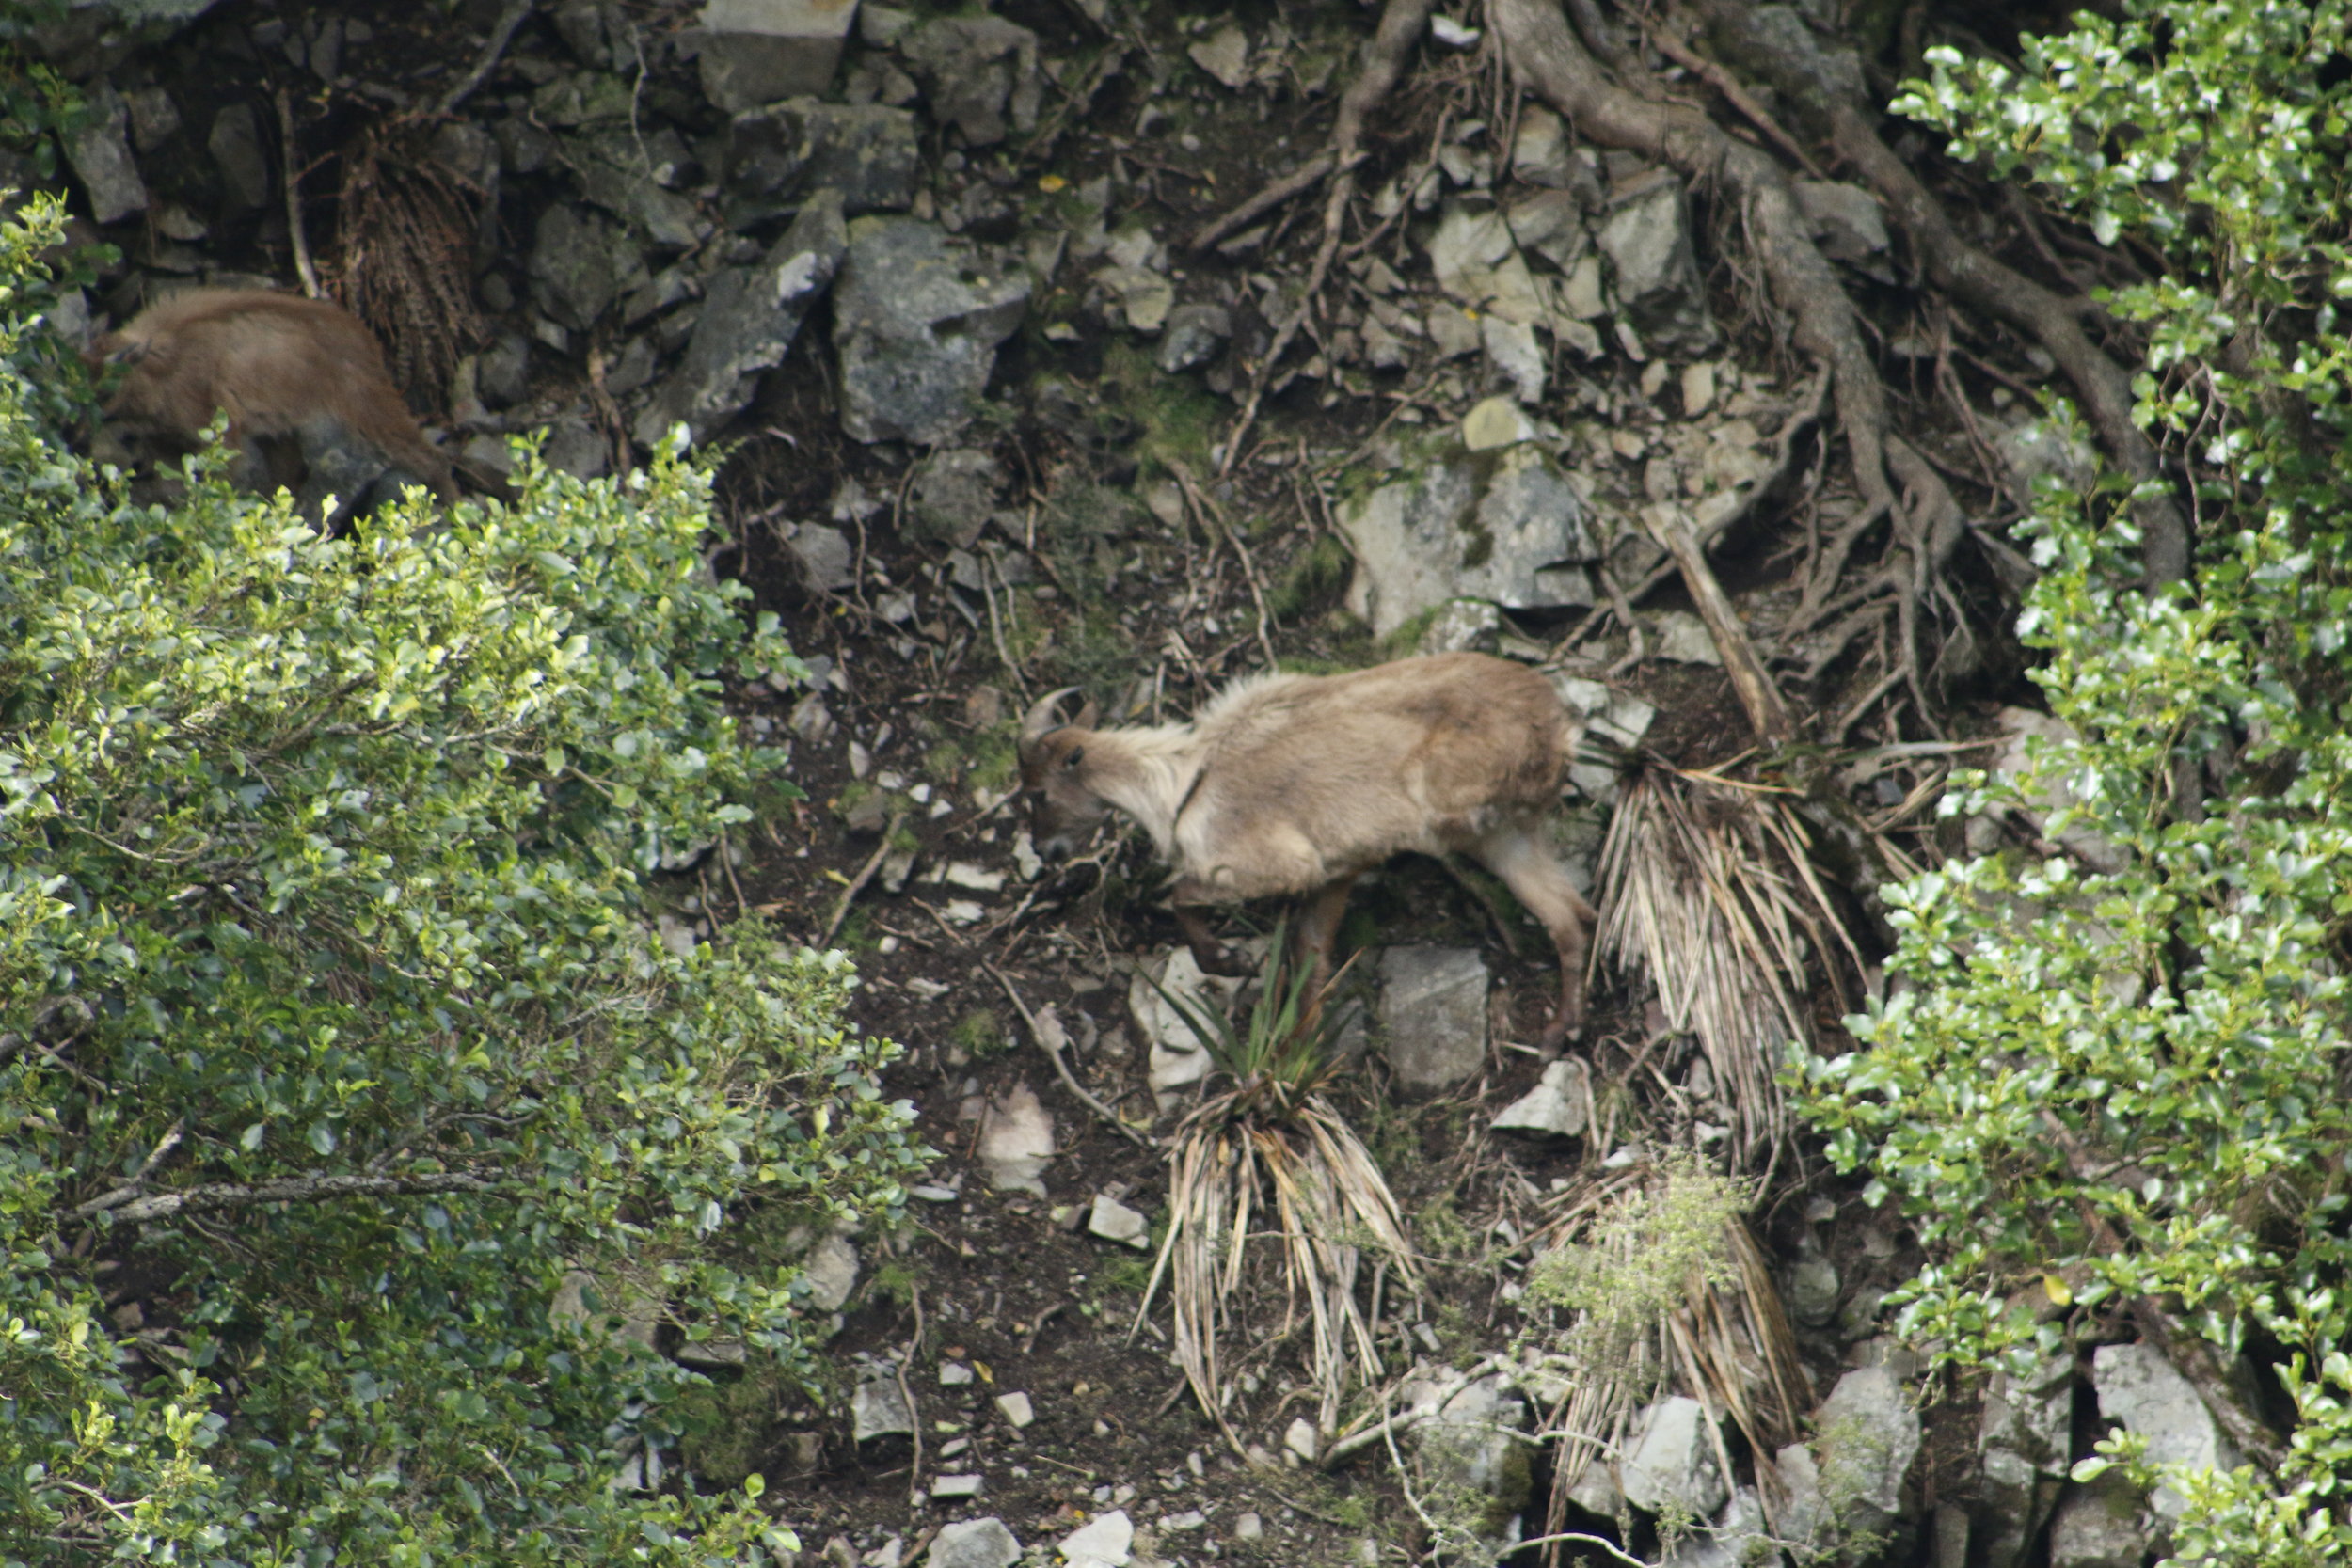  This Tahr only has three legs and yet was fully capable getting around the hillside.    